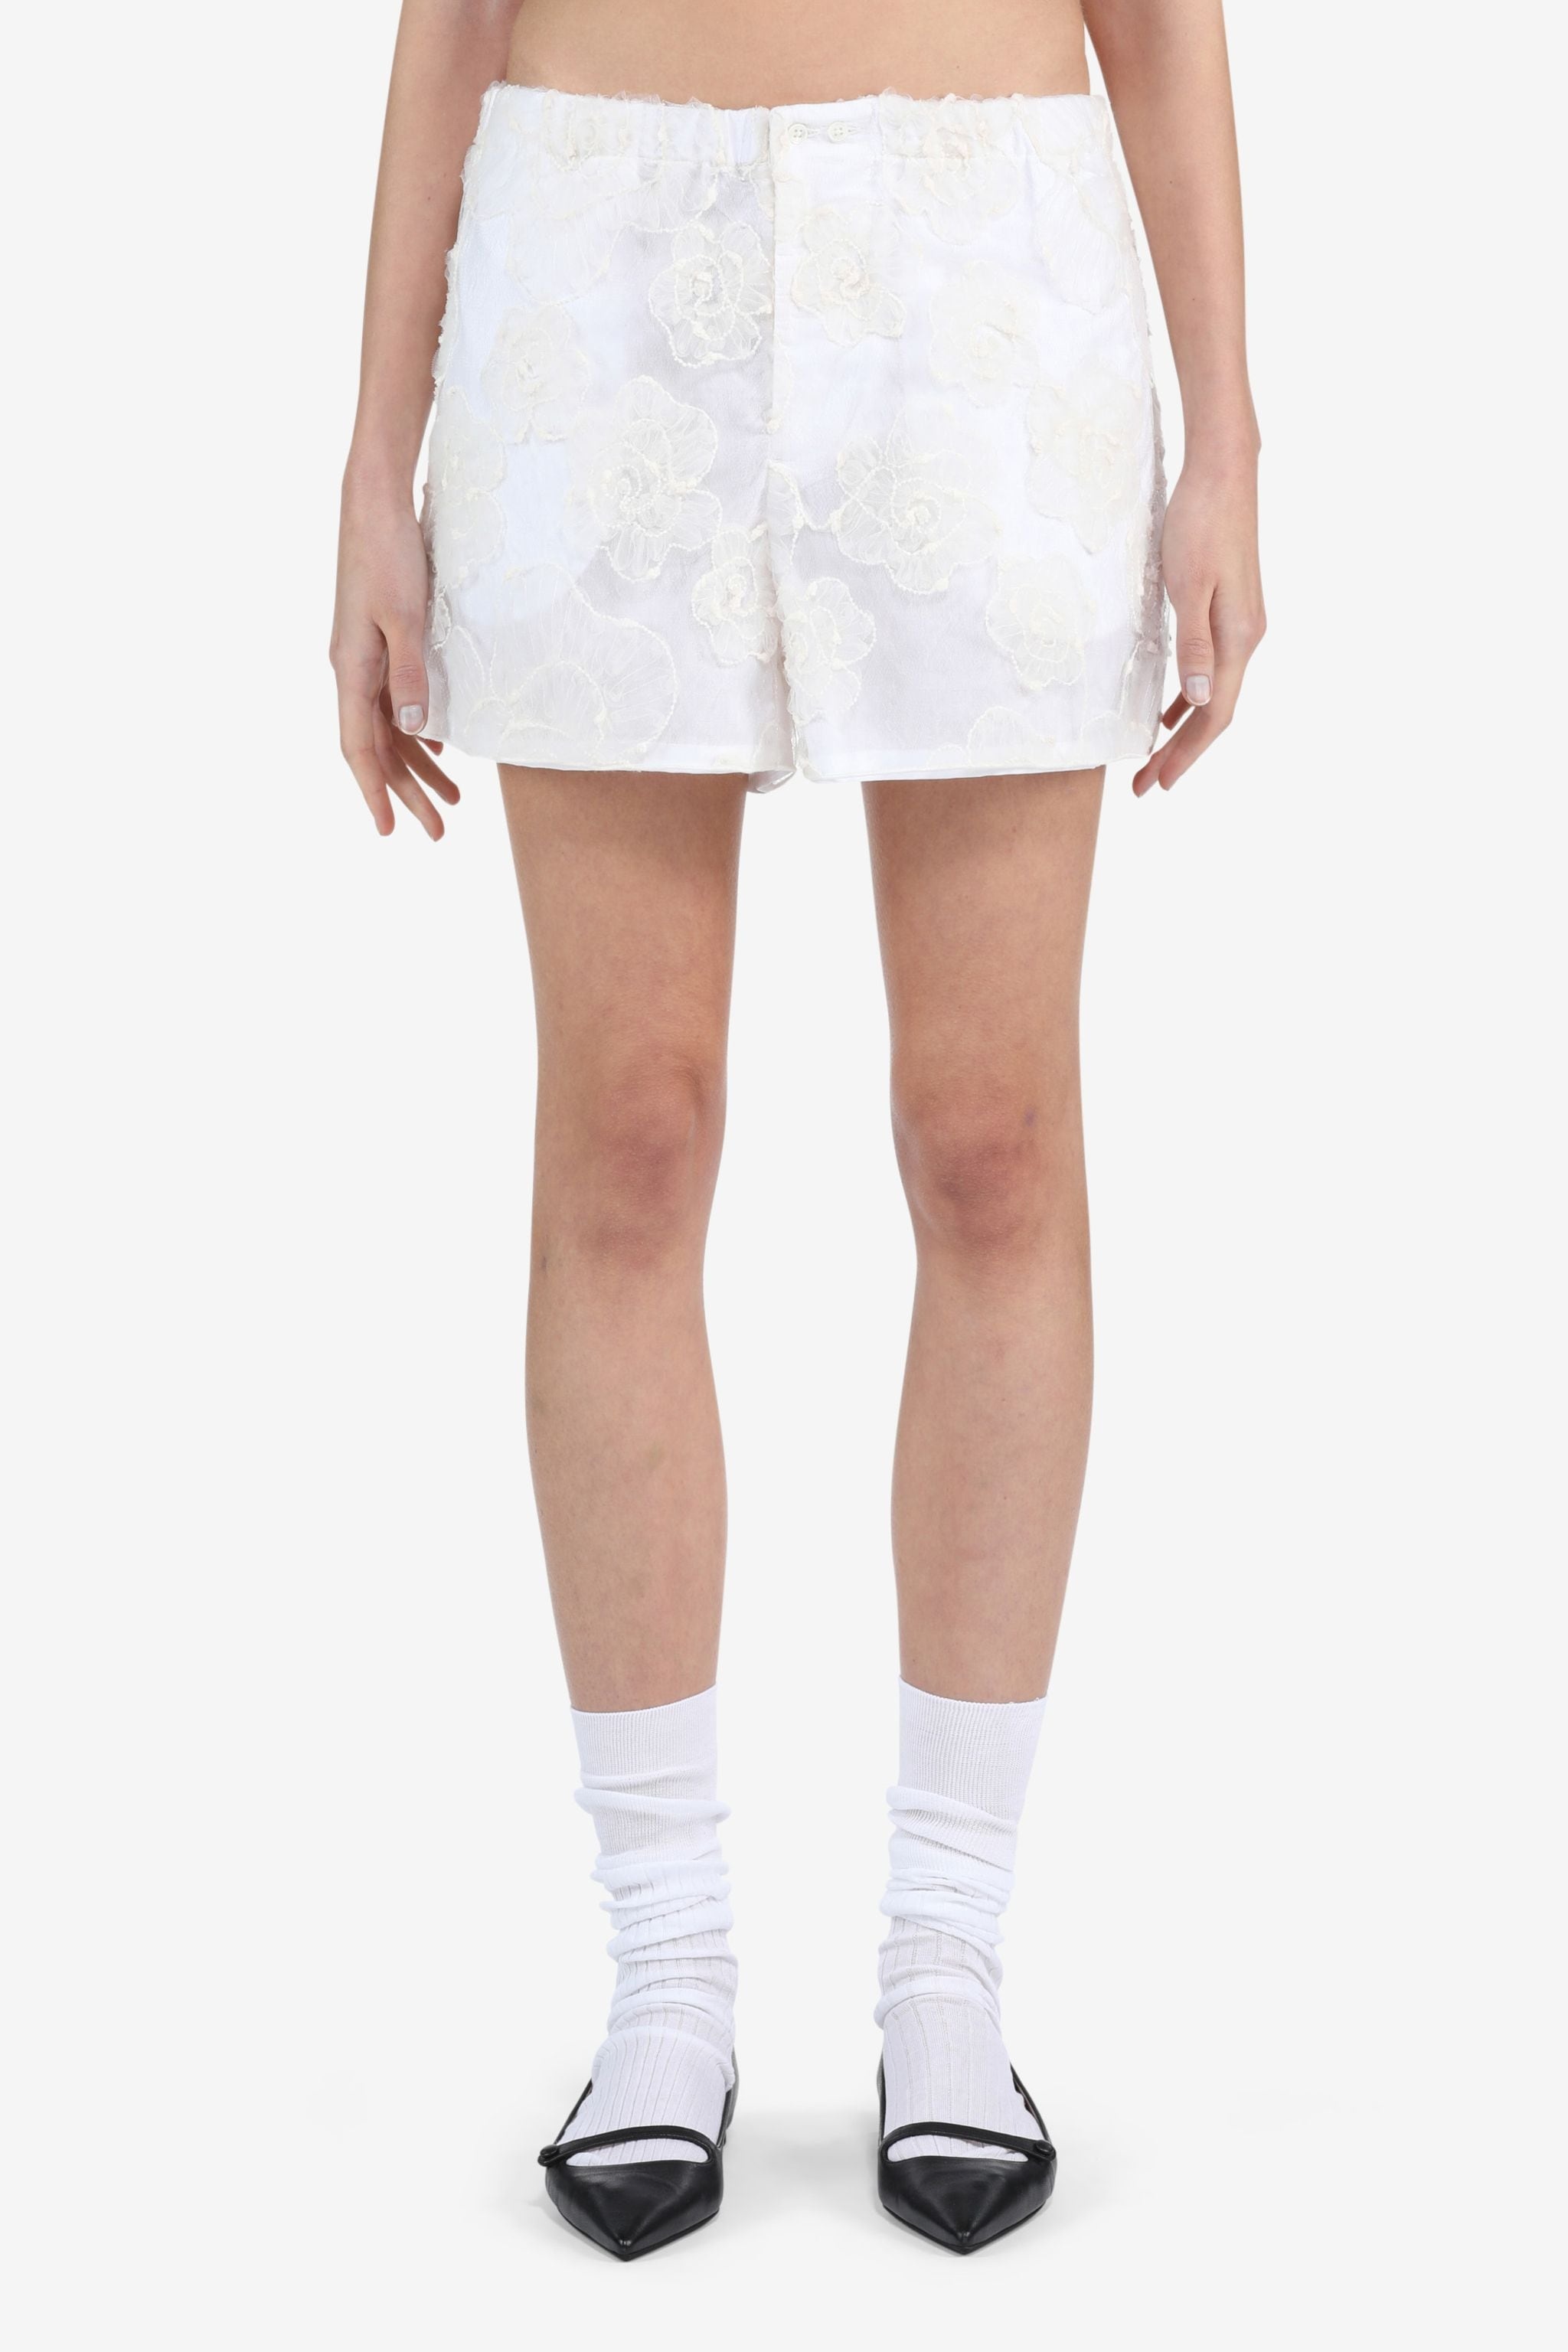 FLORAL-EMBROIDERED SHORTS - 1